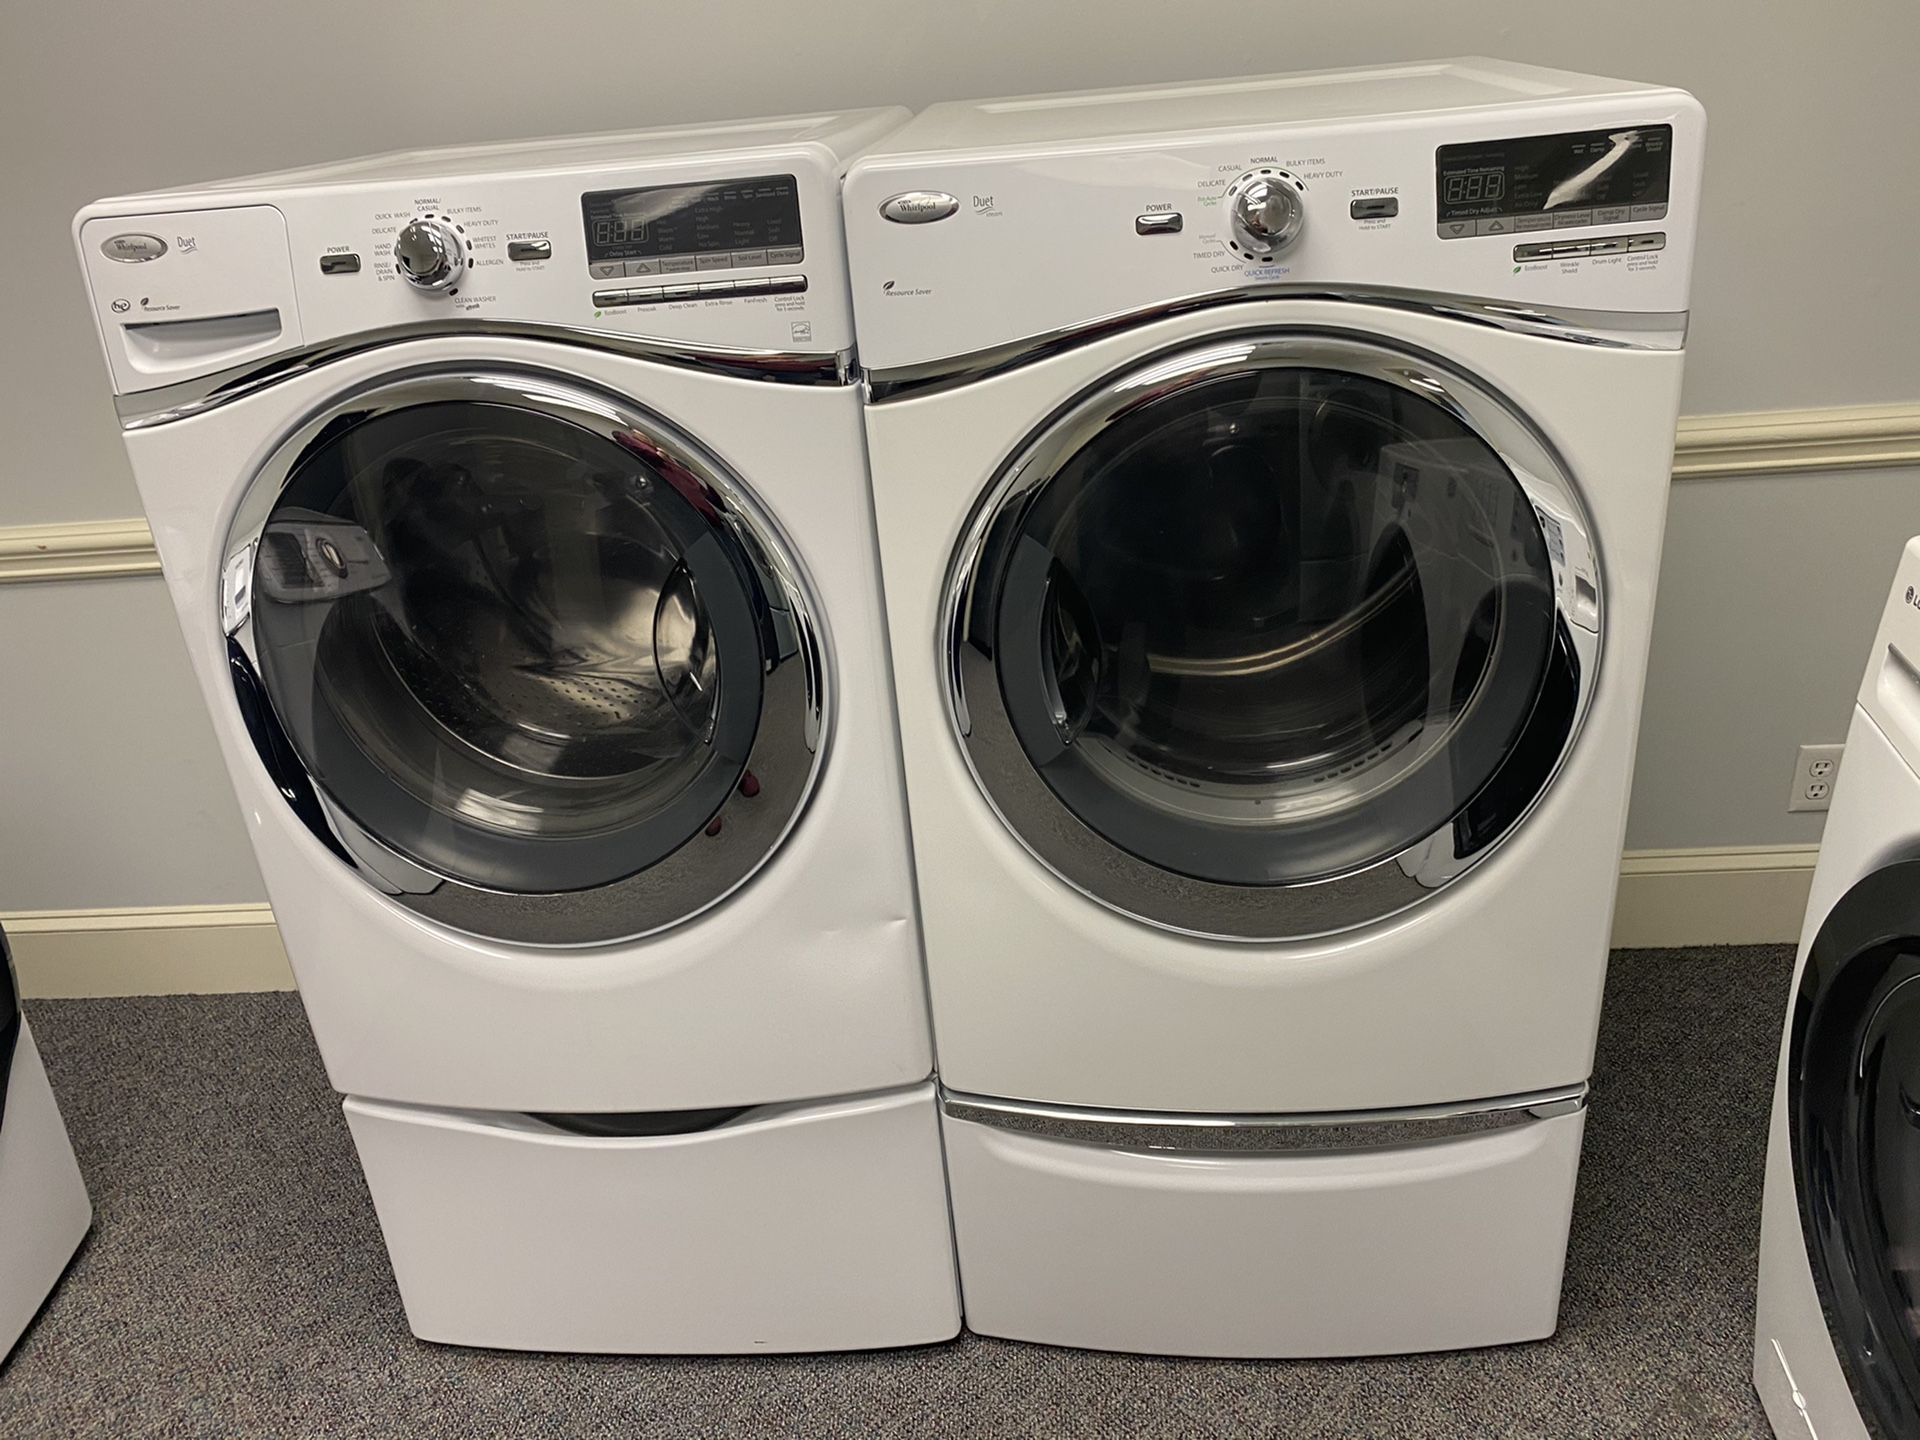 Whirlpool DUET STEAM HIGH EFFICIENCY FRONT LOAD WASHER AND DRYER SET ON PEDESTALS 4 MONTH WARRANTY